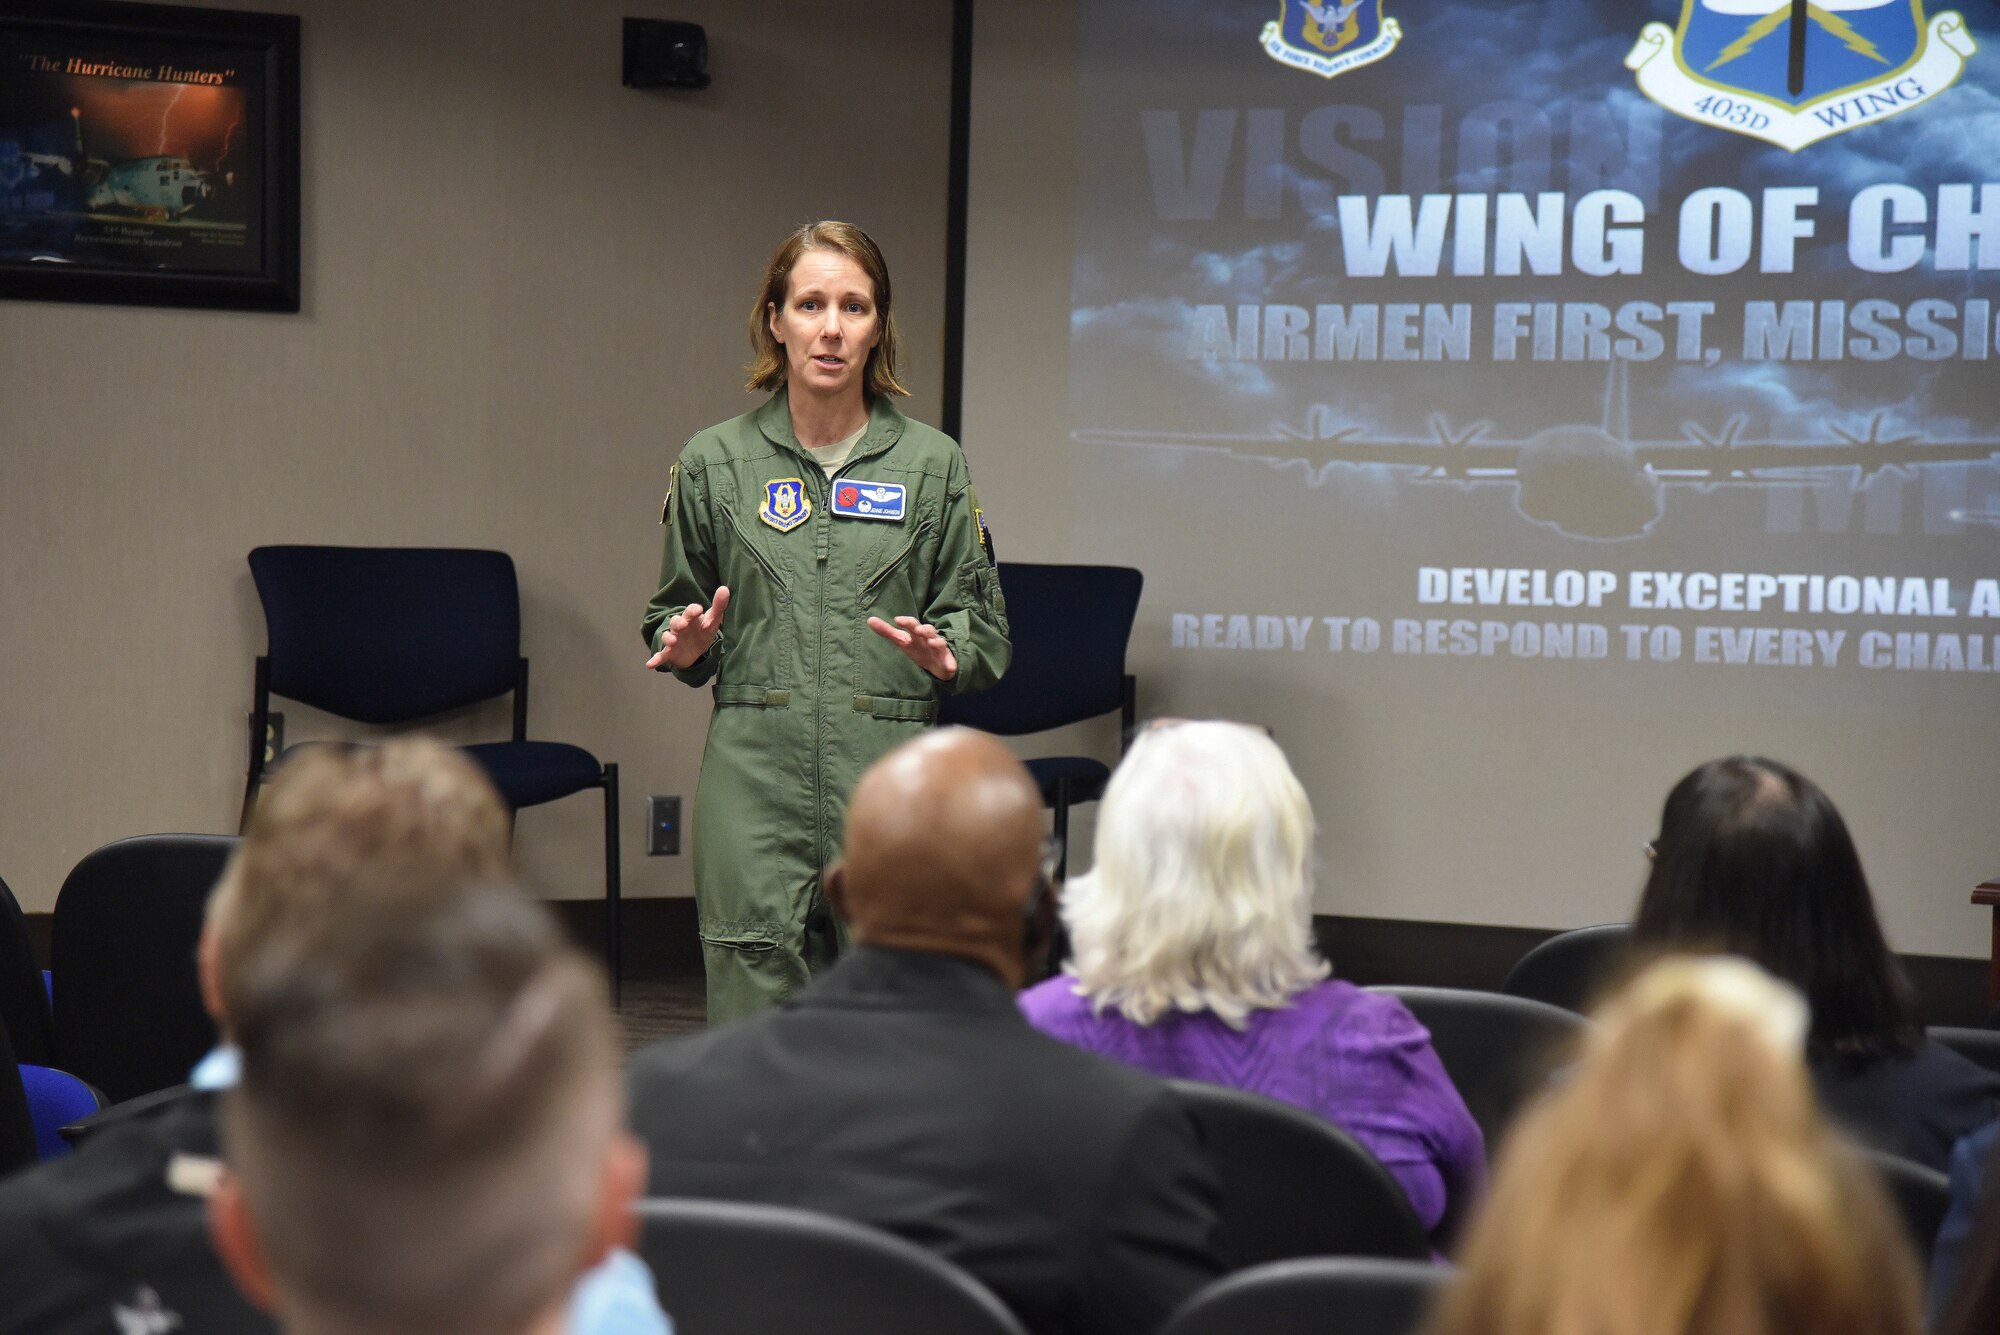 Col. Jennie R. Johnson, 403rd Wing commander, welcomes Keesler Air Force Base Honorary Commanders during a tour of the wing March 8, 2019. The 403rd Wing hosted the group and informed the local civic leaders about the Air Force Reserve and wing mission. (U.S. Air Force photo by Tech. Sgt. Michael Farrar)